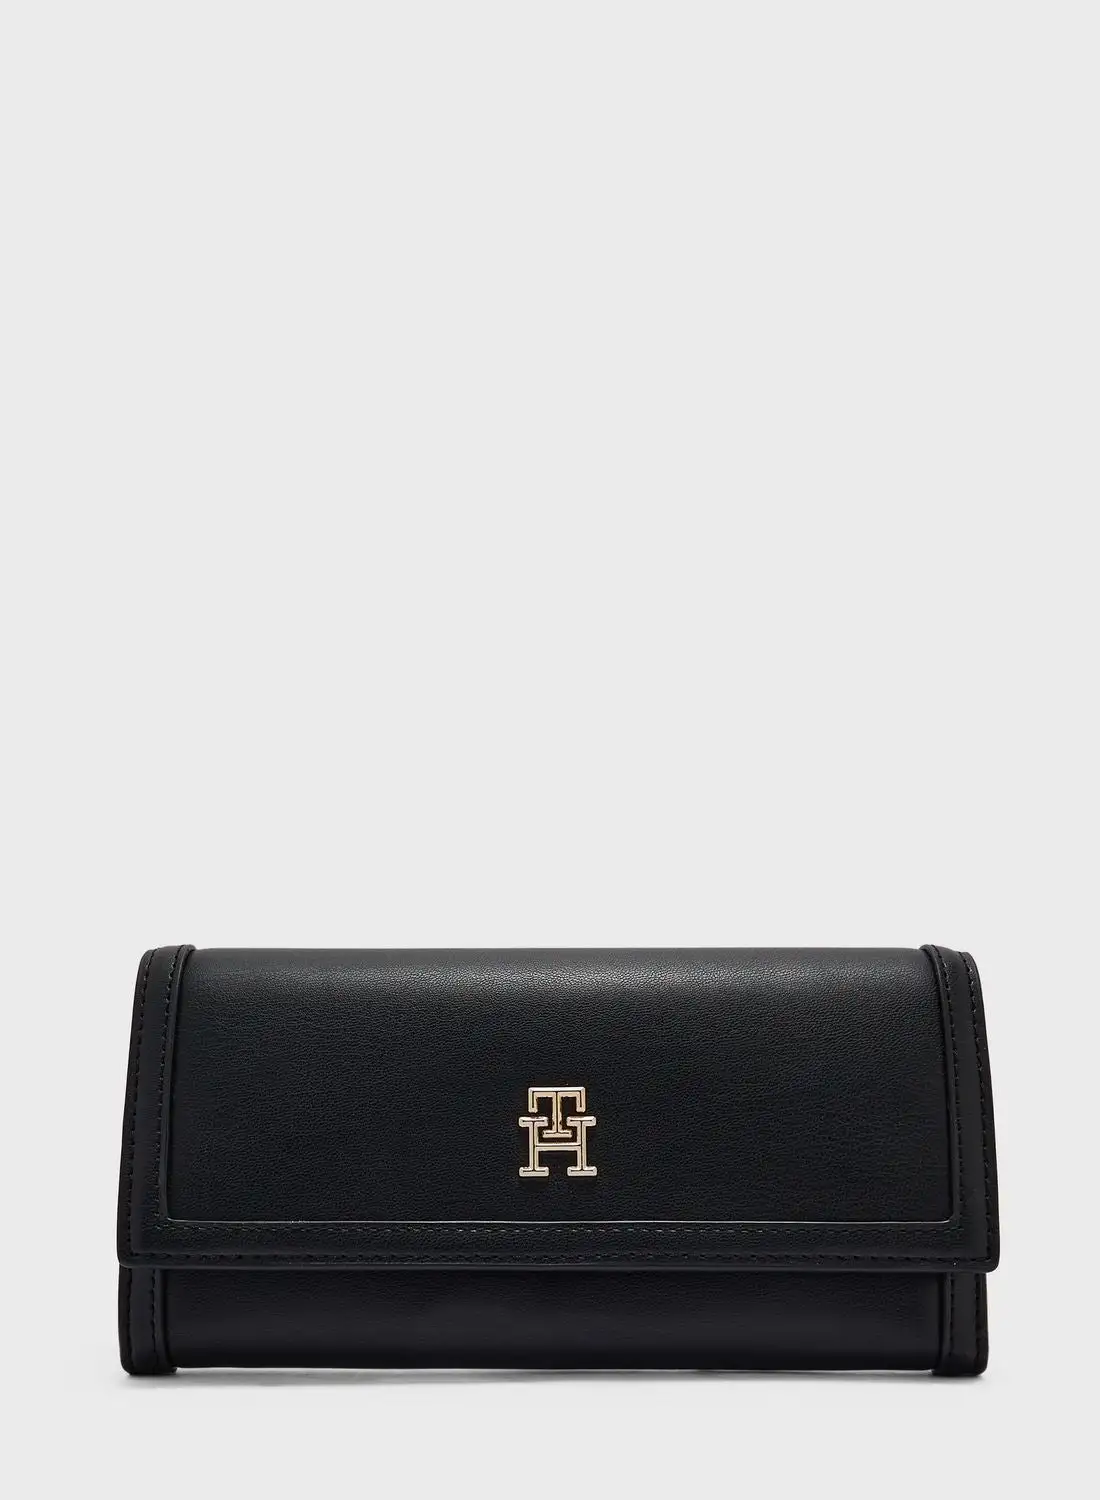 TOMMY HILFIGER Flap City Compact Wallet